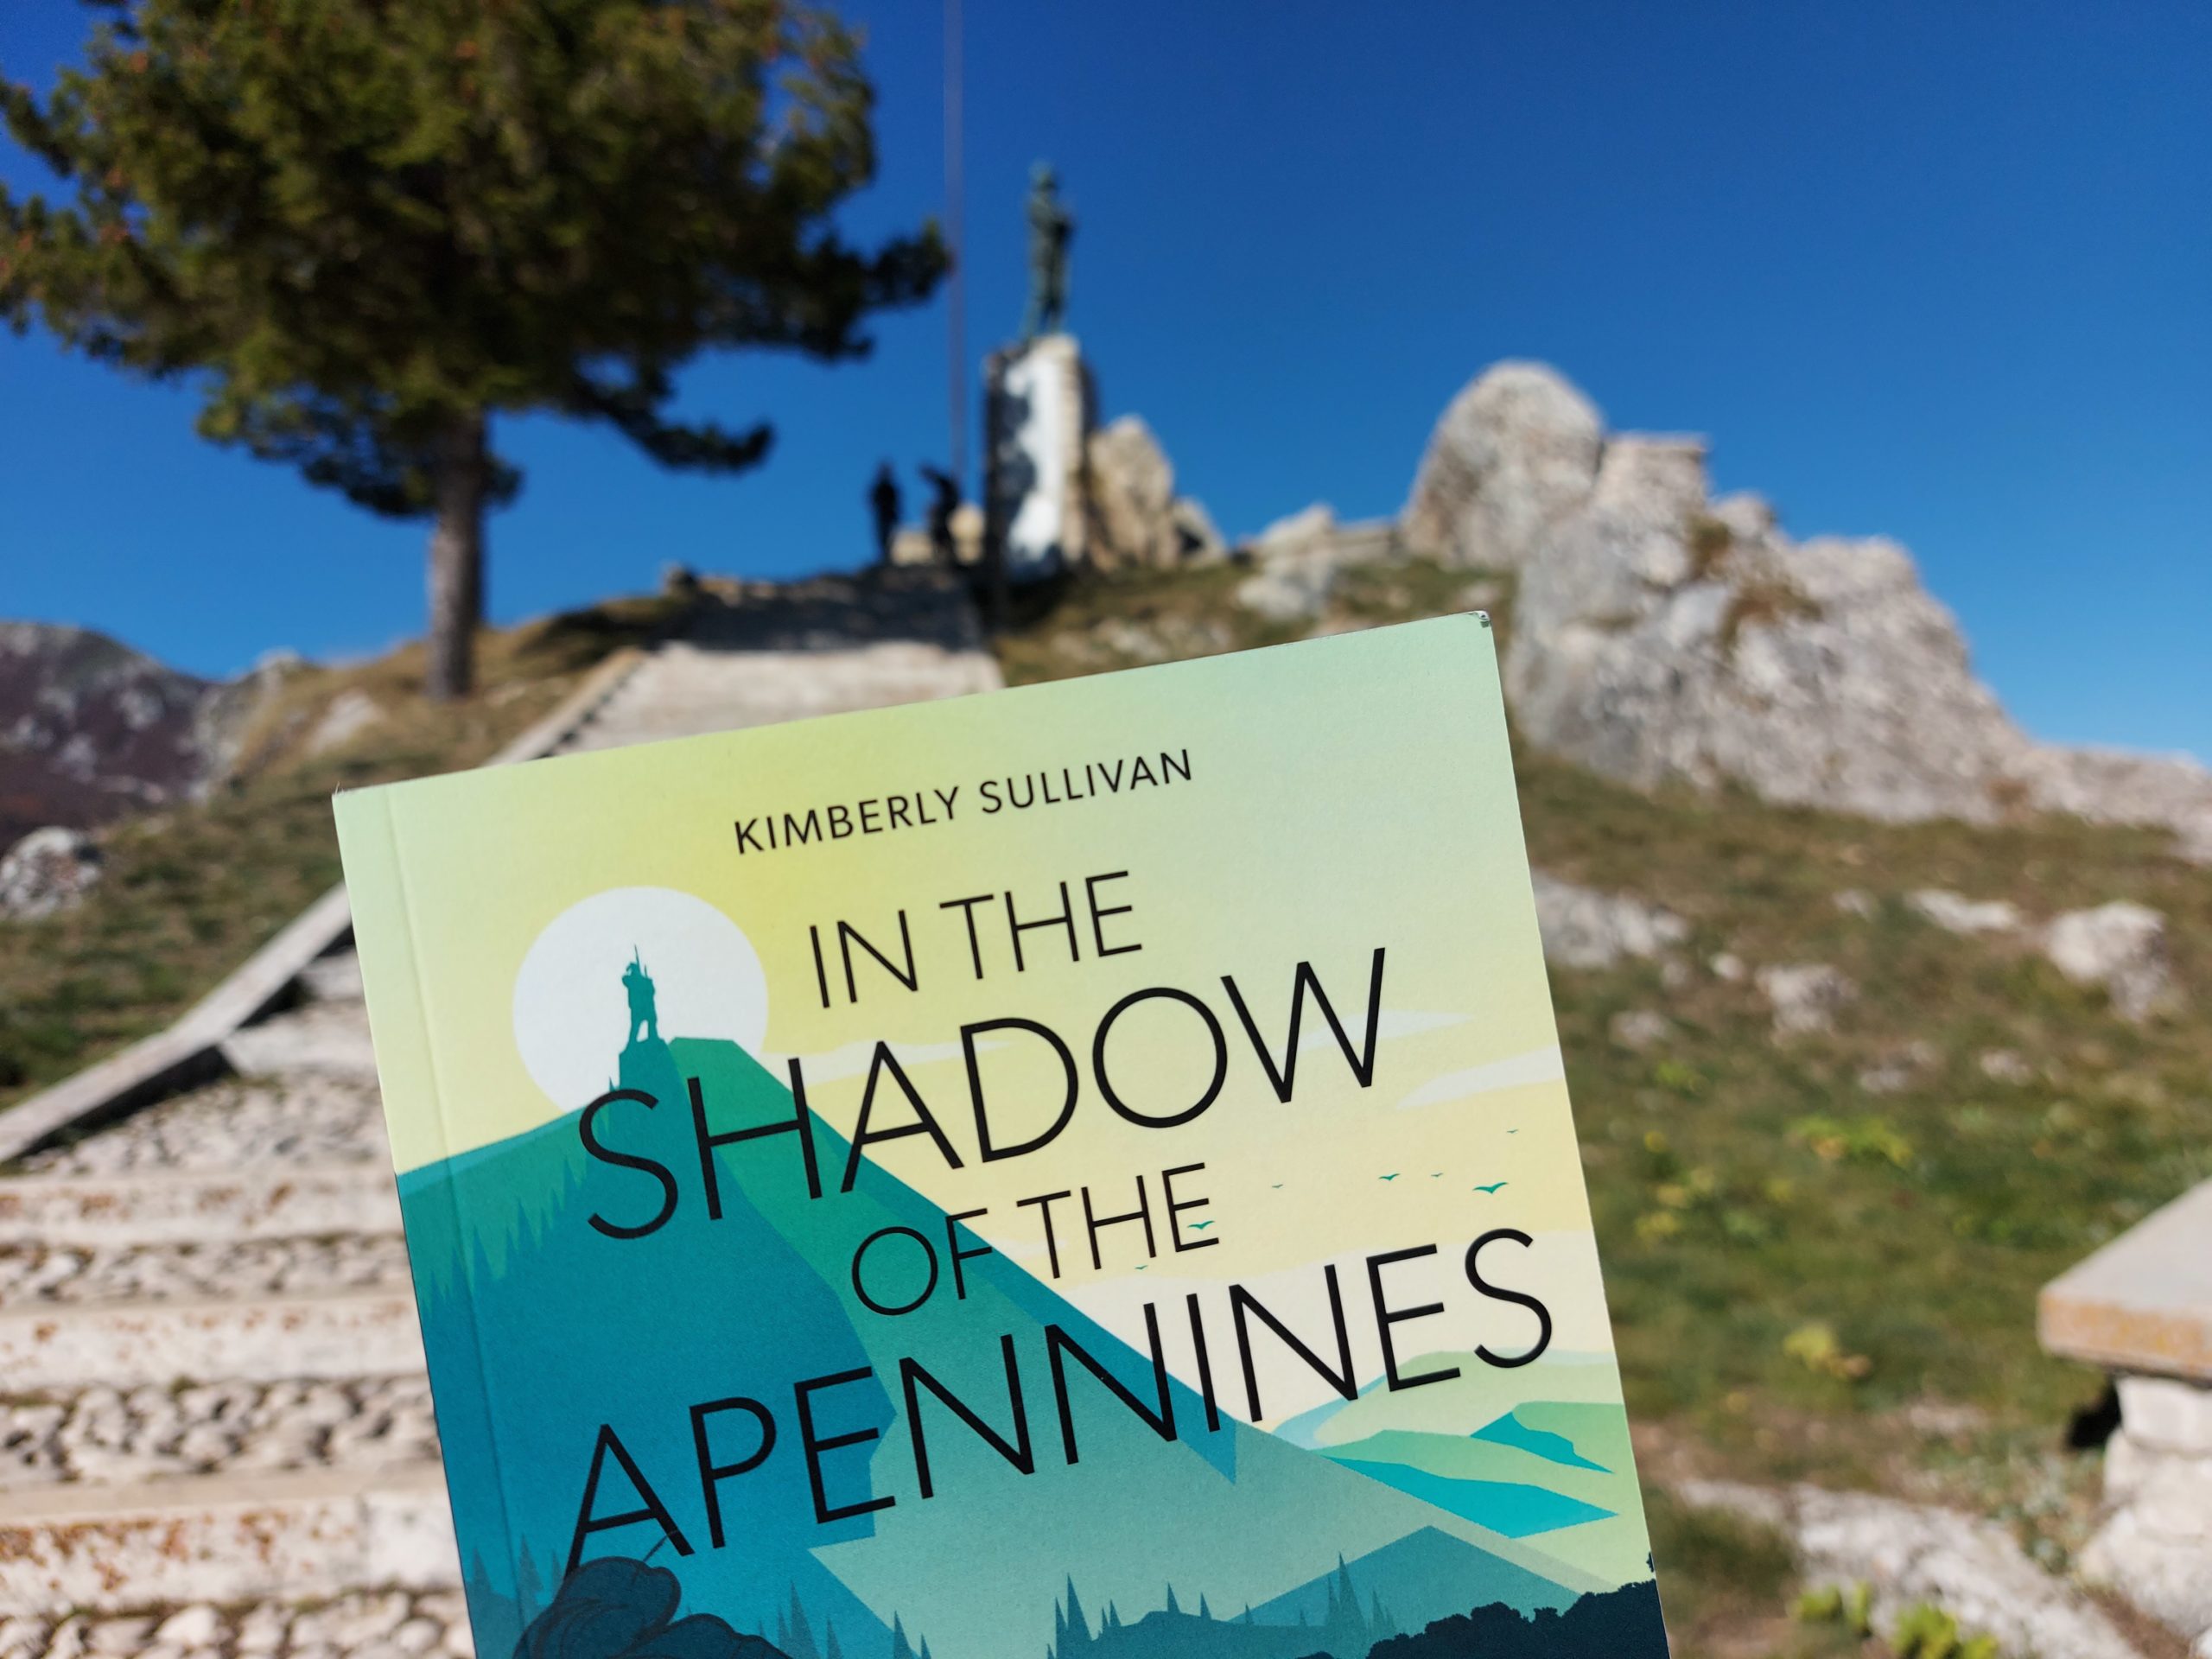 In The Shadow of The Apennines in Abruzzo/ Kimberly Sullivan